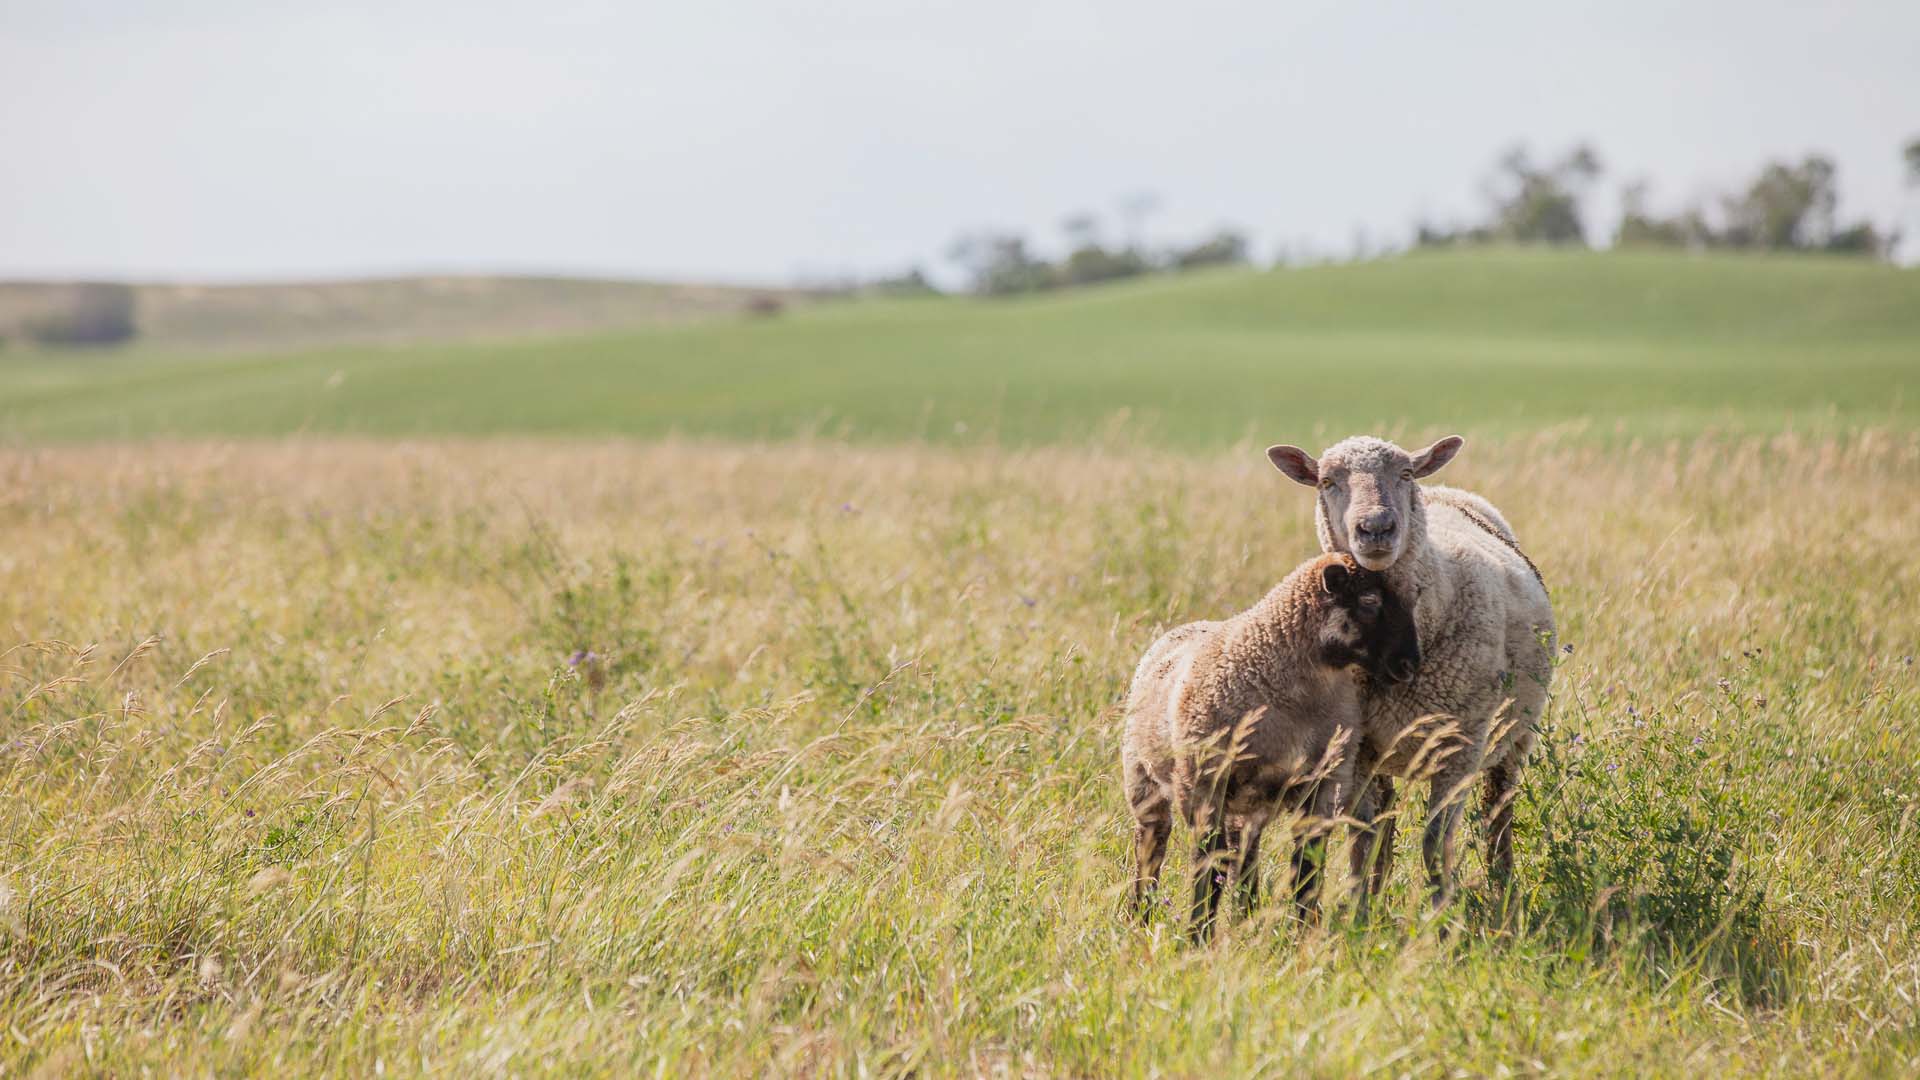 Two sheep in a grassy field